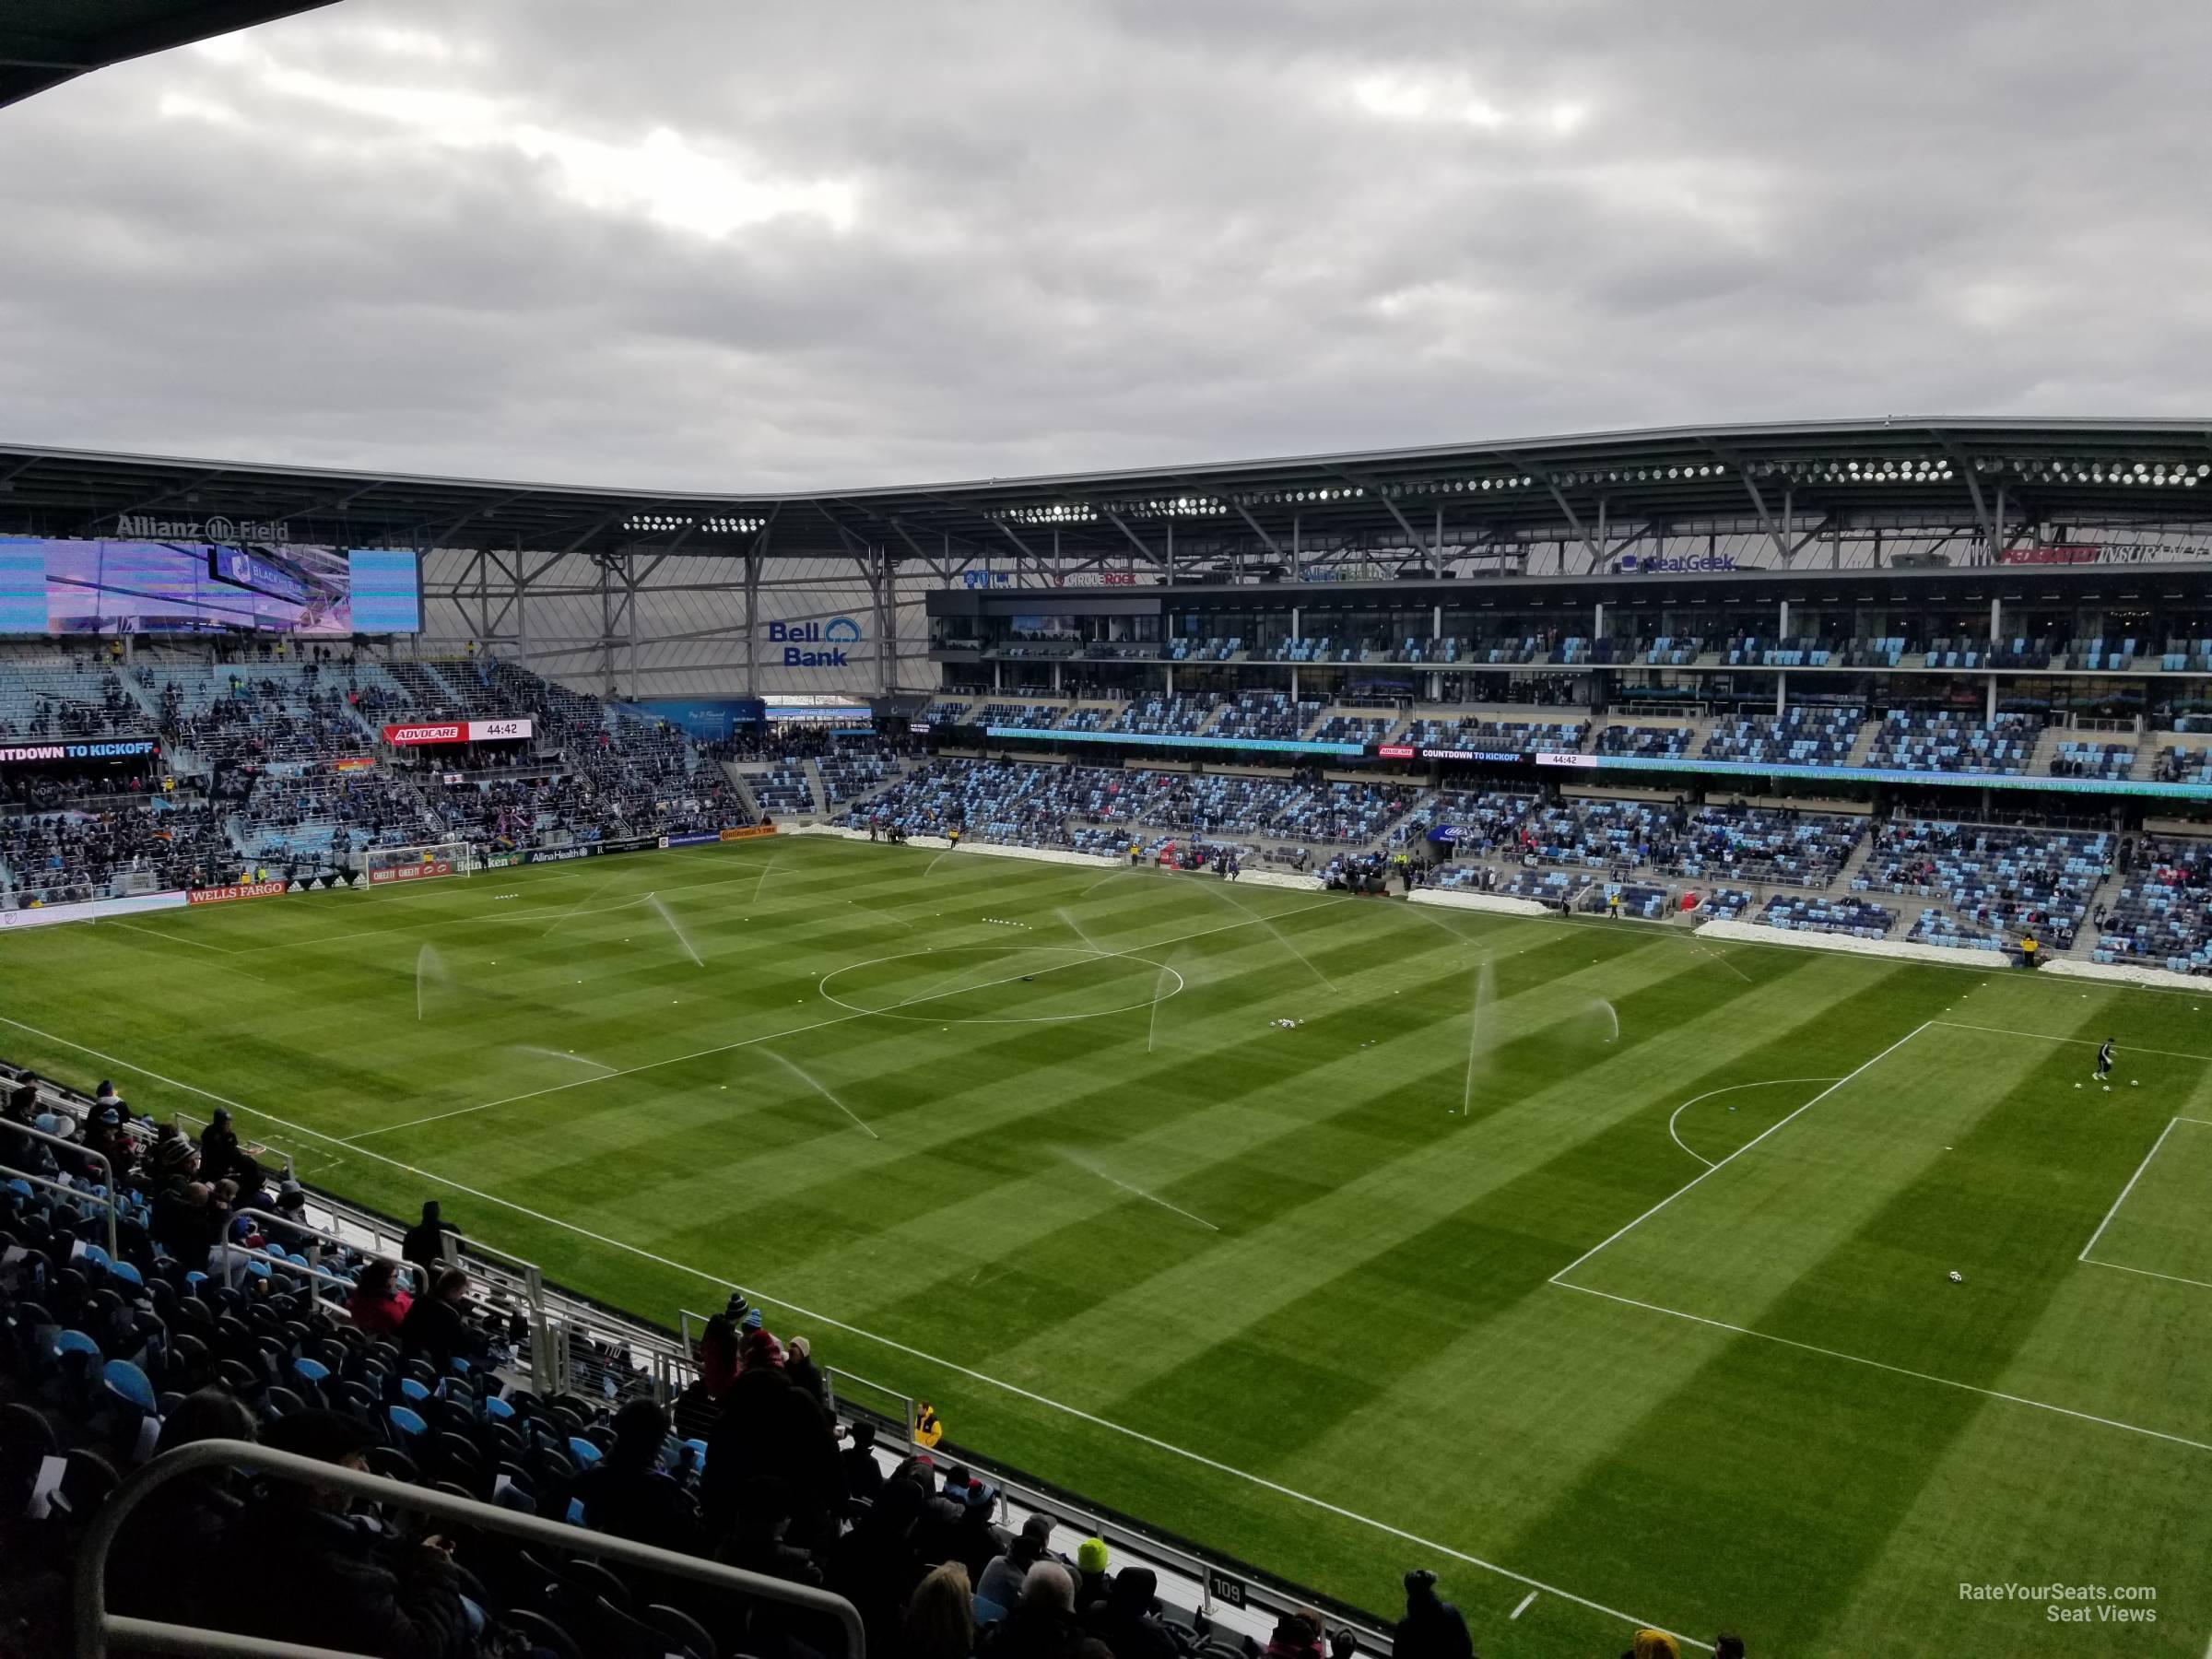 section 108, row 14 seat view  - allianz field